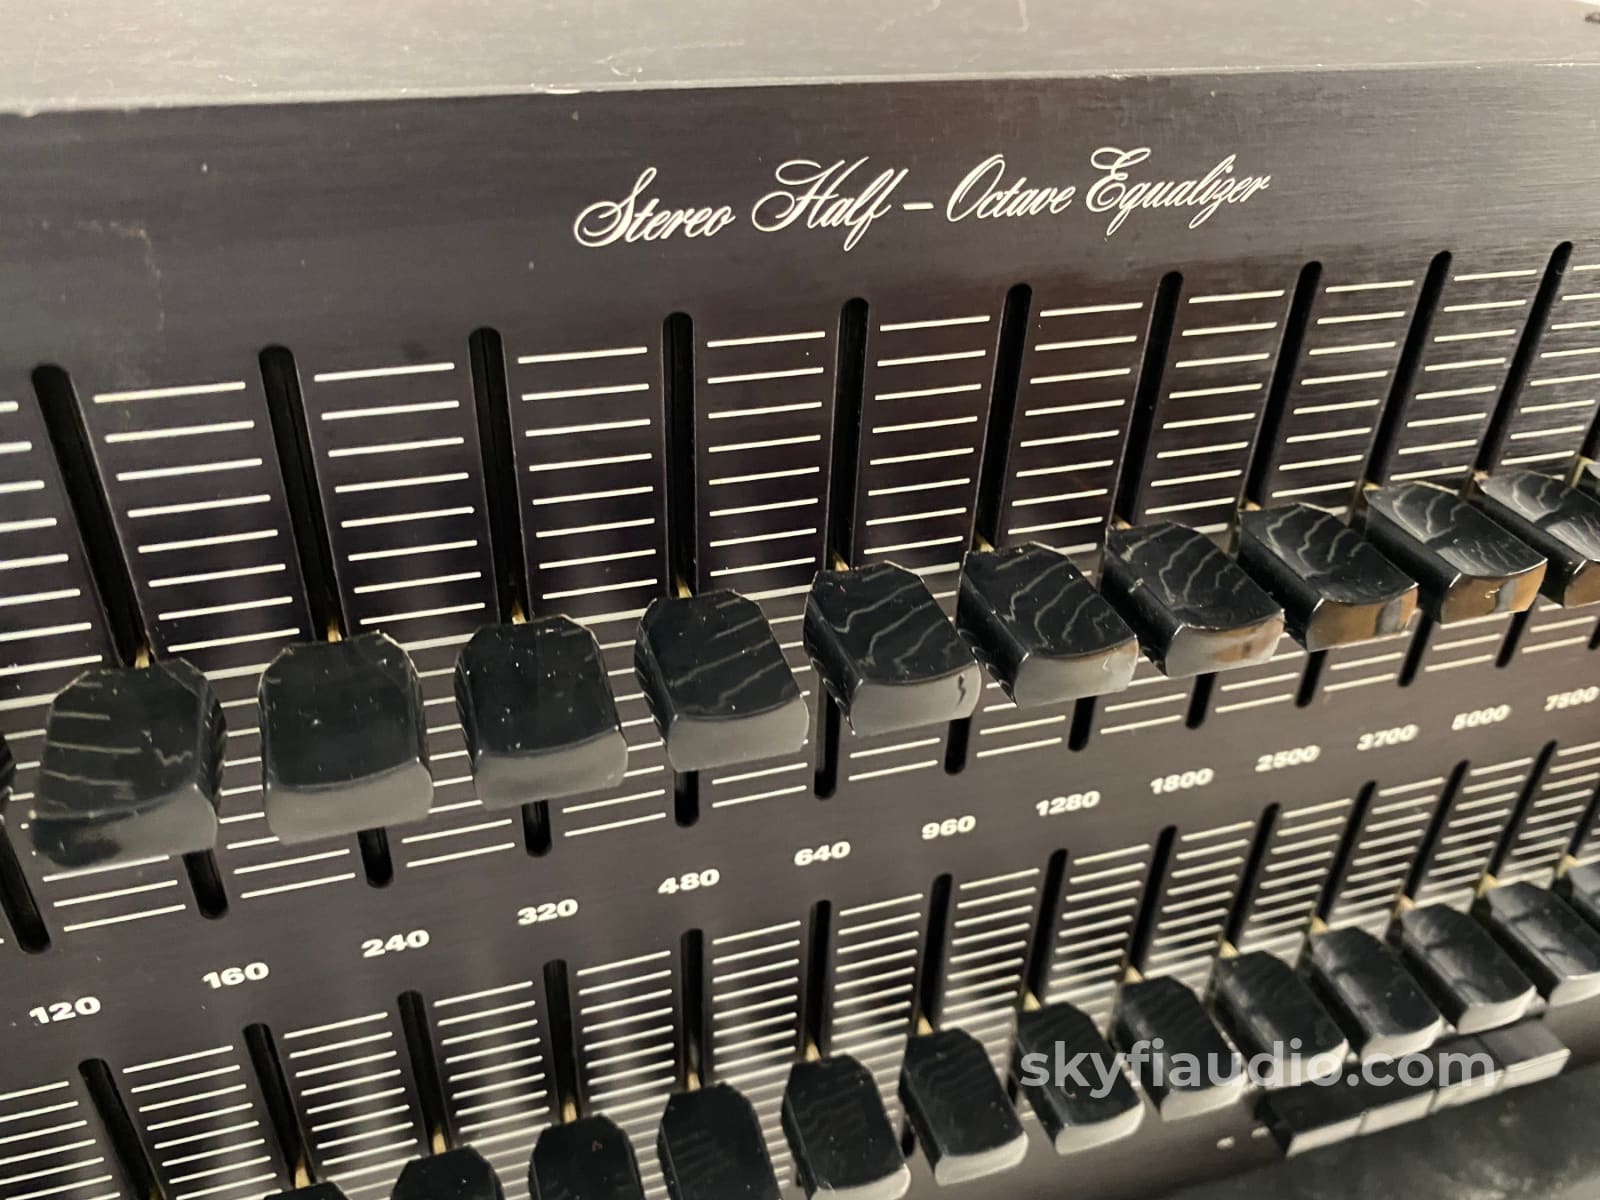 Sae 2700B Stereo Half-Octave Equalizer Eq - Wow